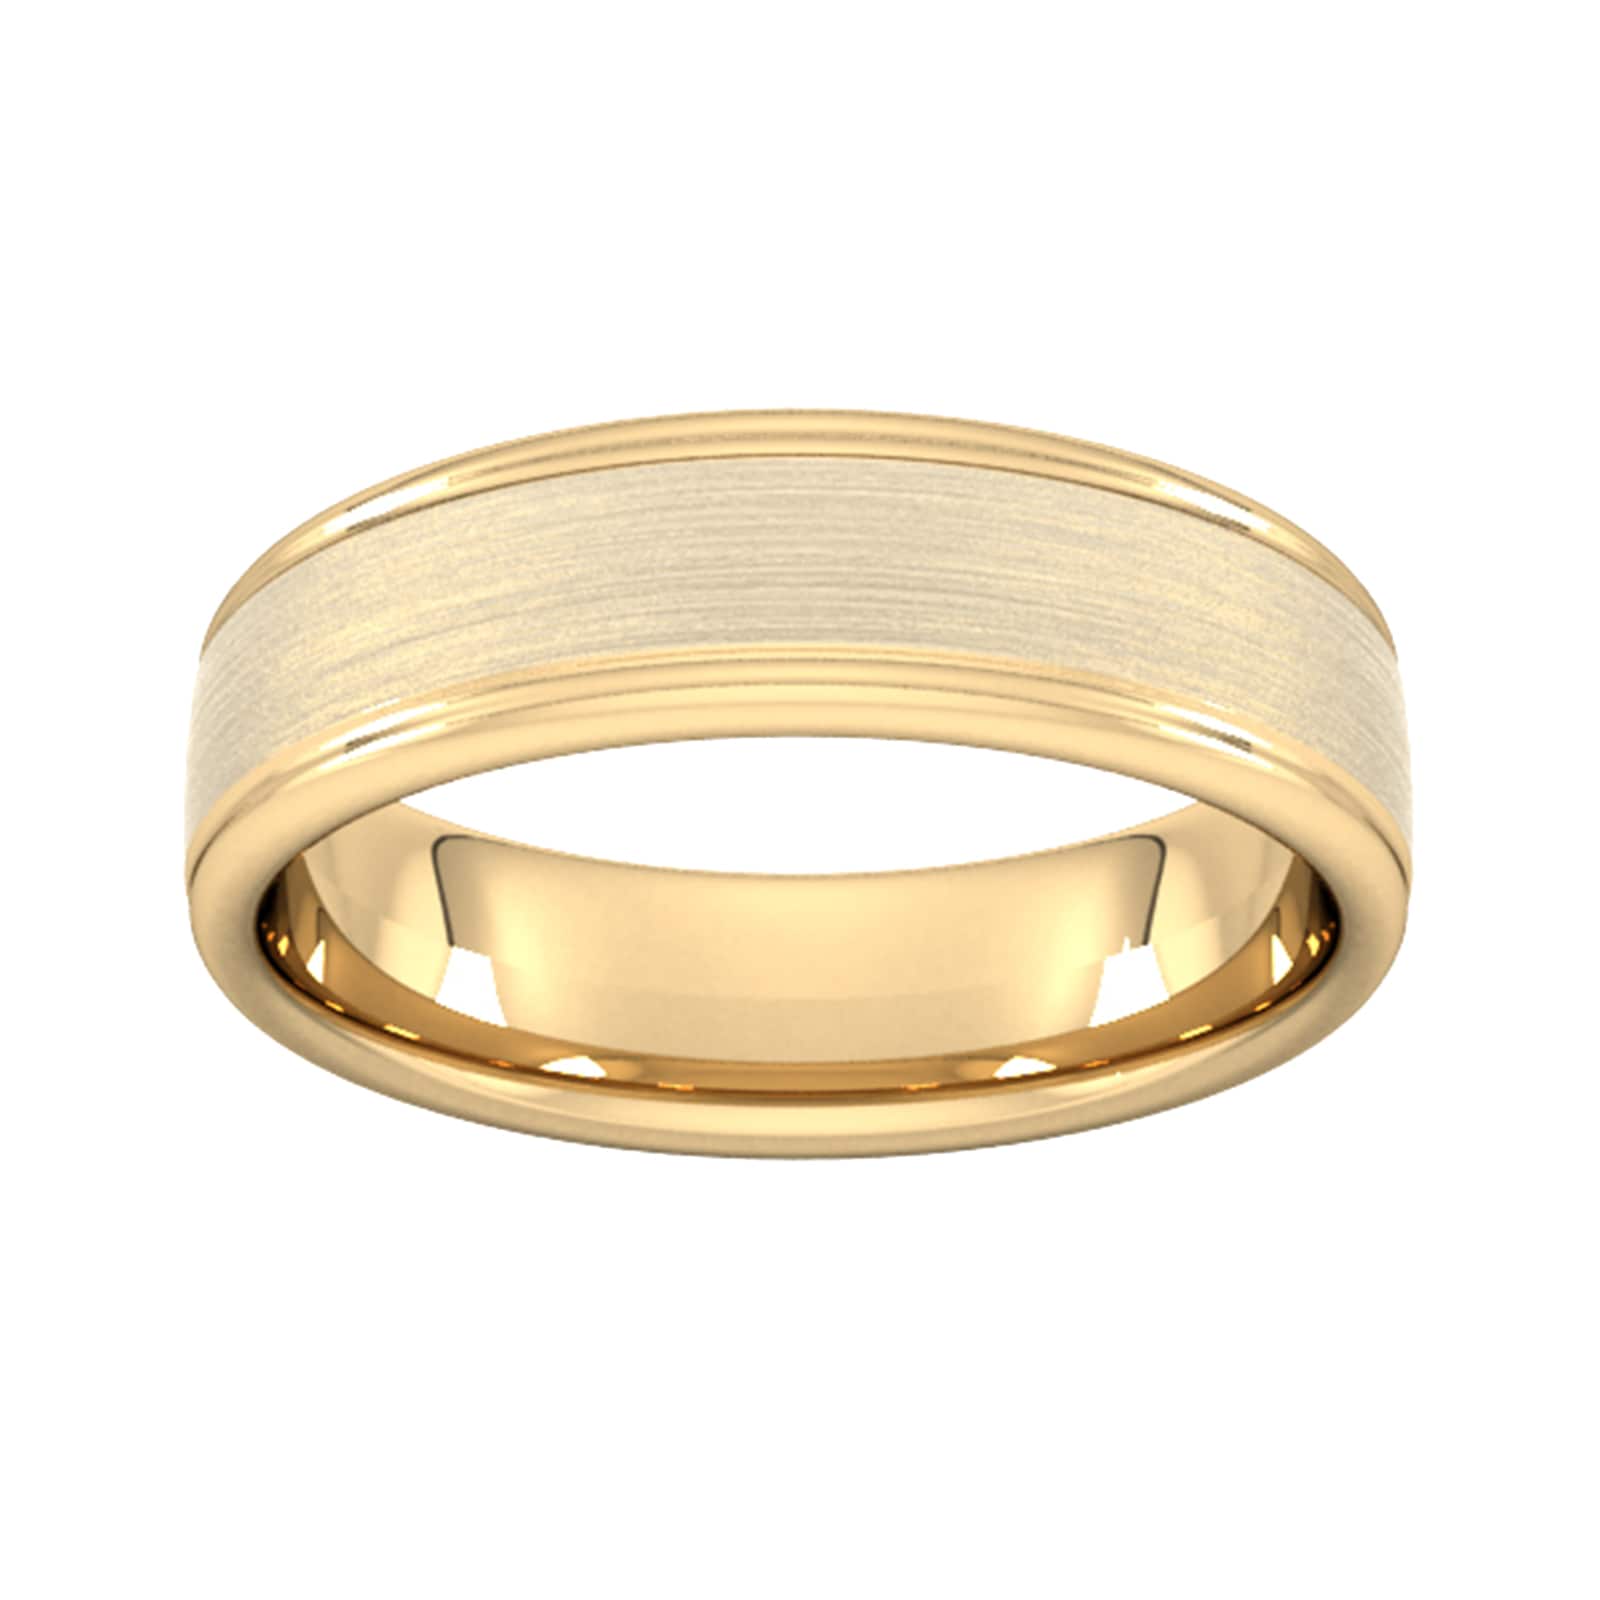 6mm Flat Court Heavy Matt Centre With Grooves Wedding Ring In 18 Carat Yellow Gold - Ring Size X